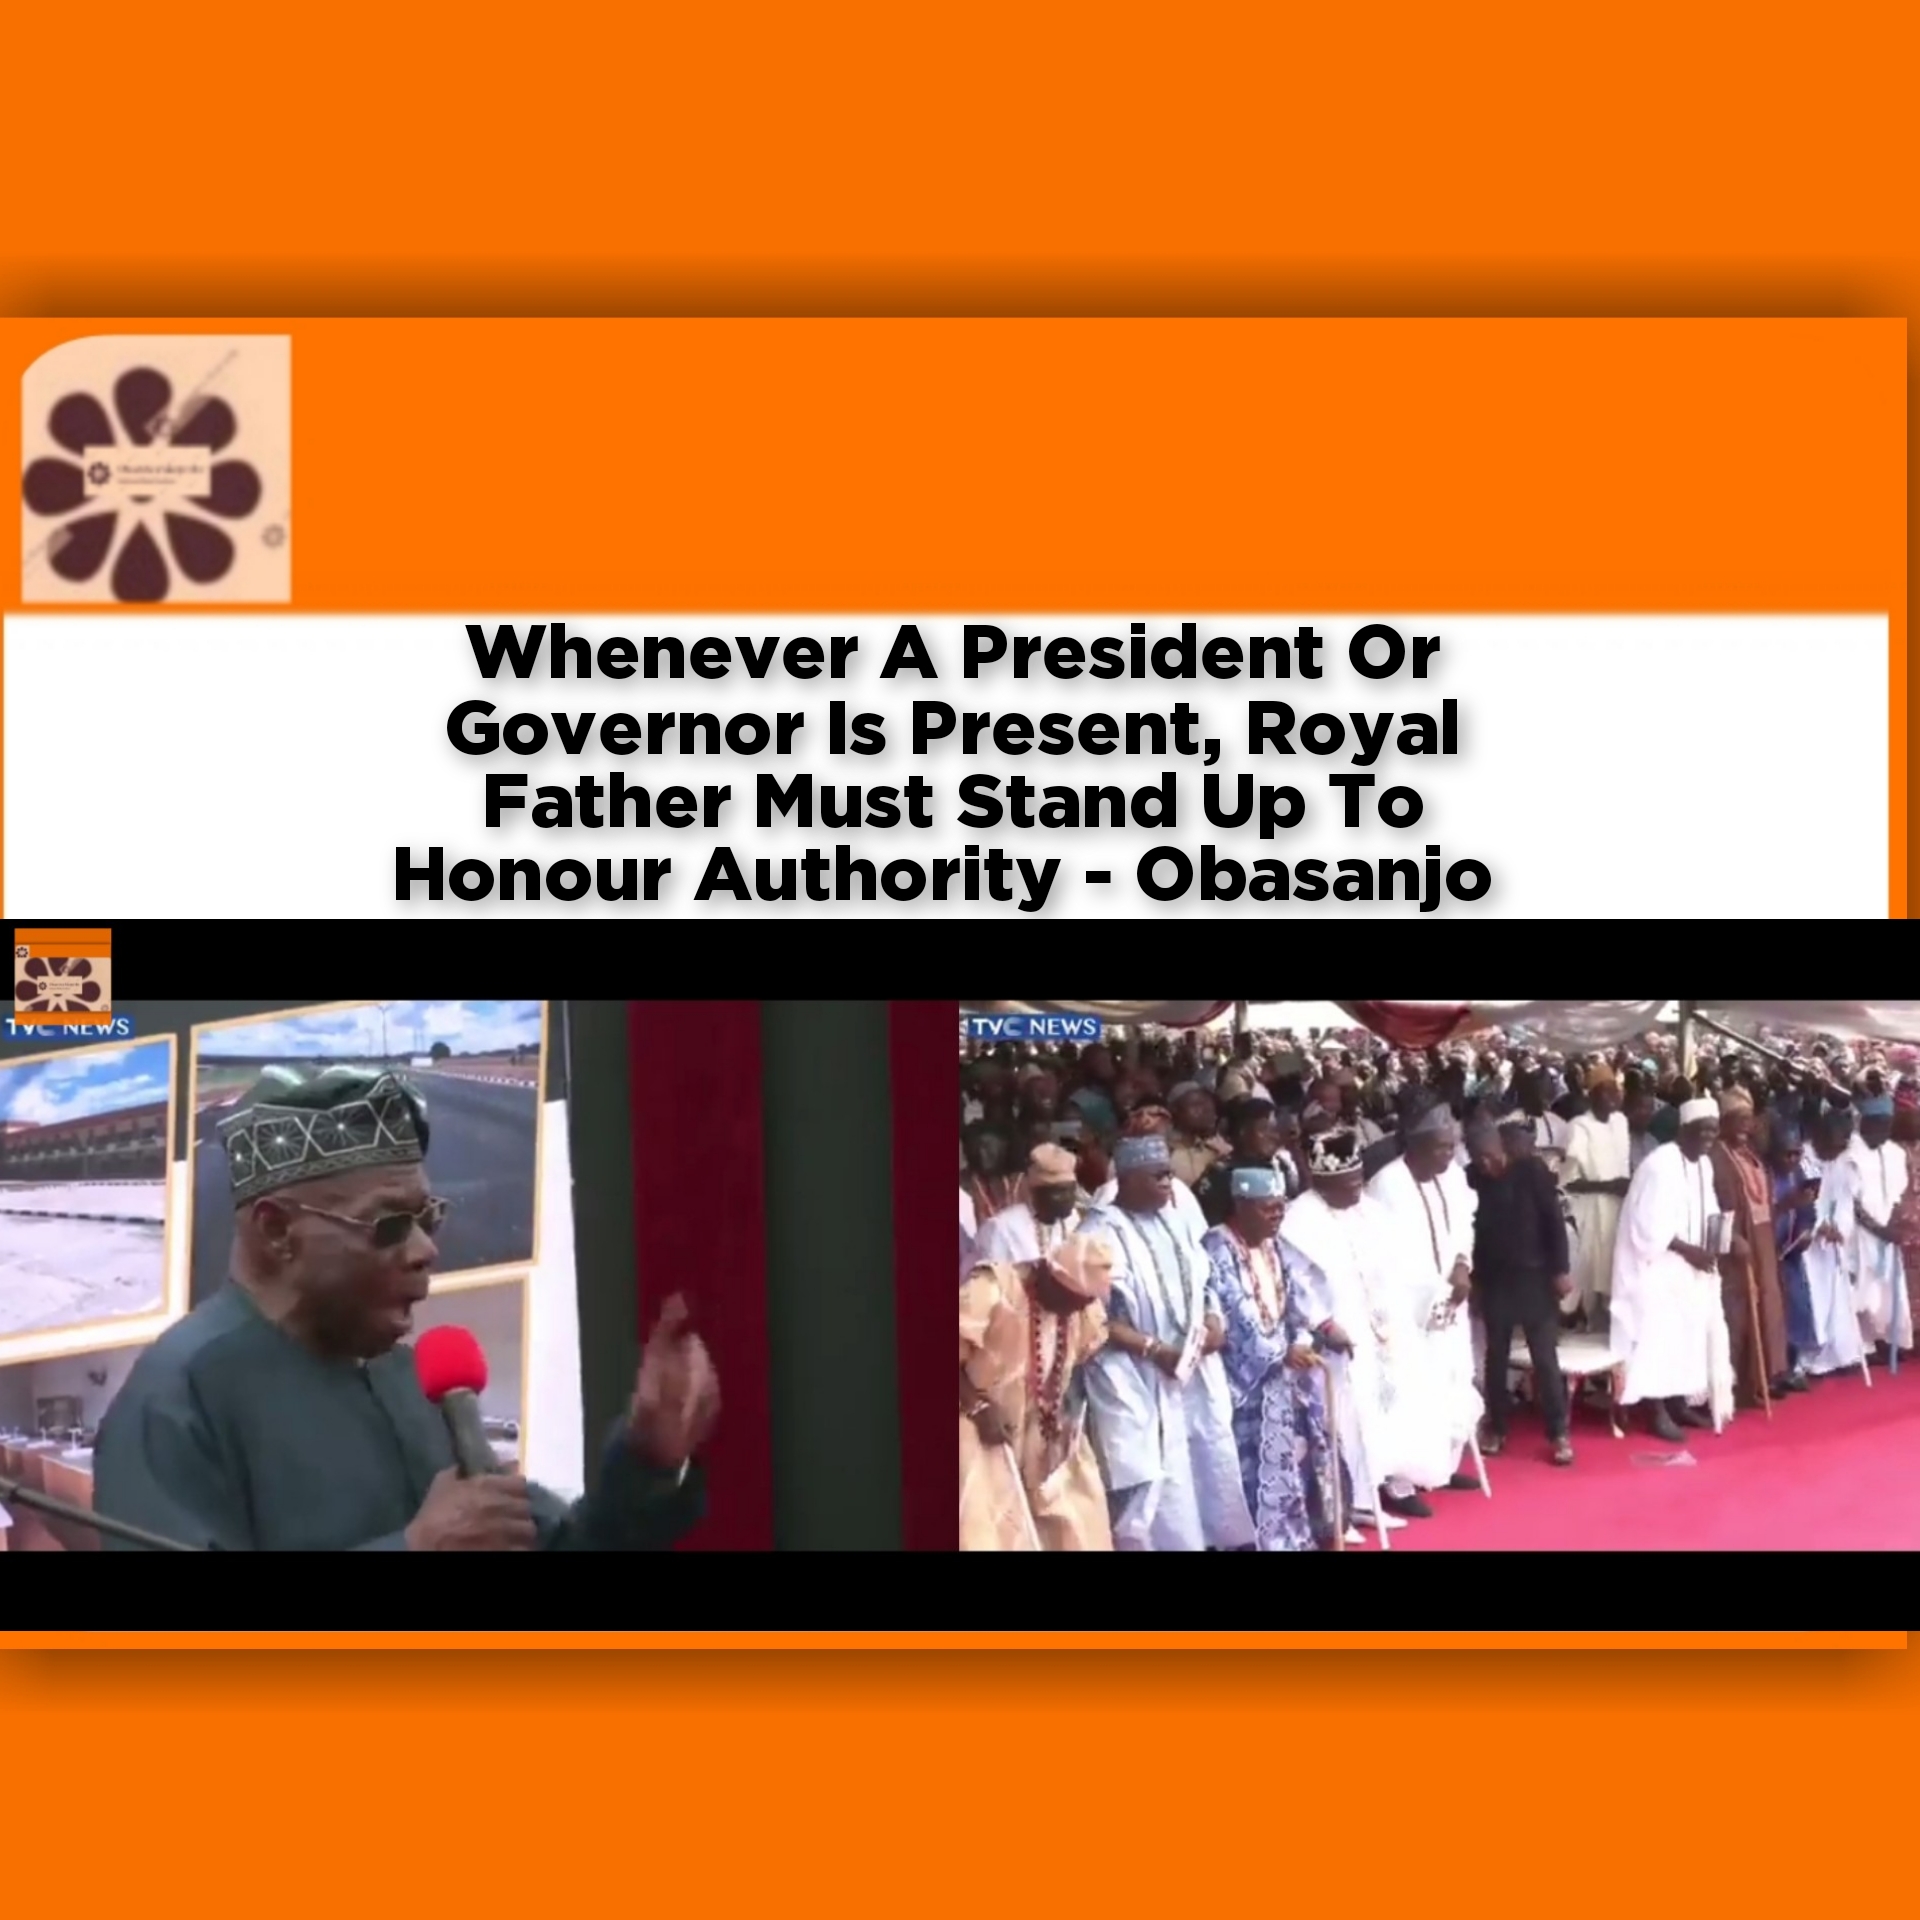 Whenever A President Or Governor Is Present, Royal Father Must Stand Up To Honour Authority - Obasanjo ~ OsazuwaAkonedo #FirstBank